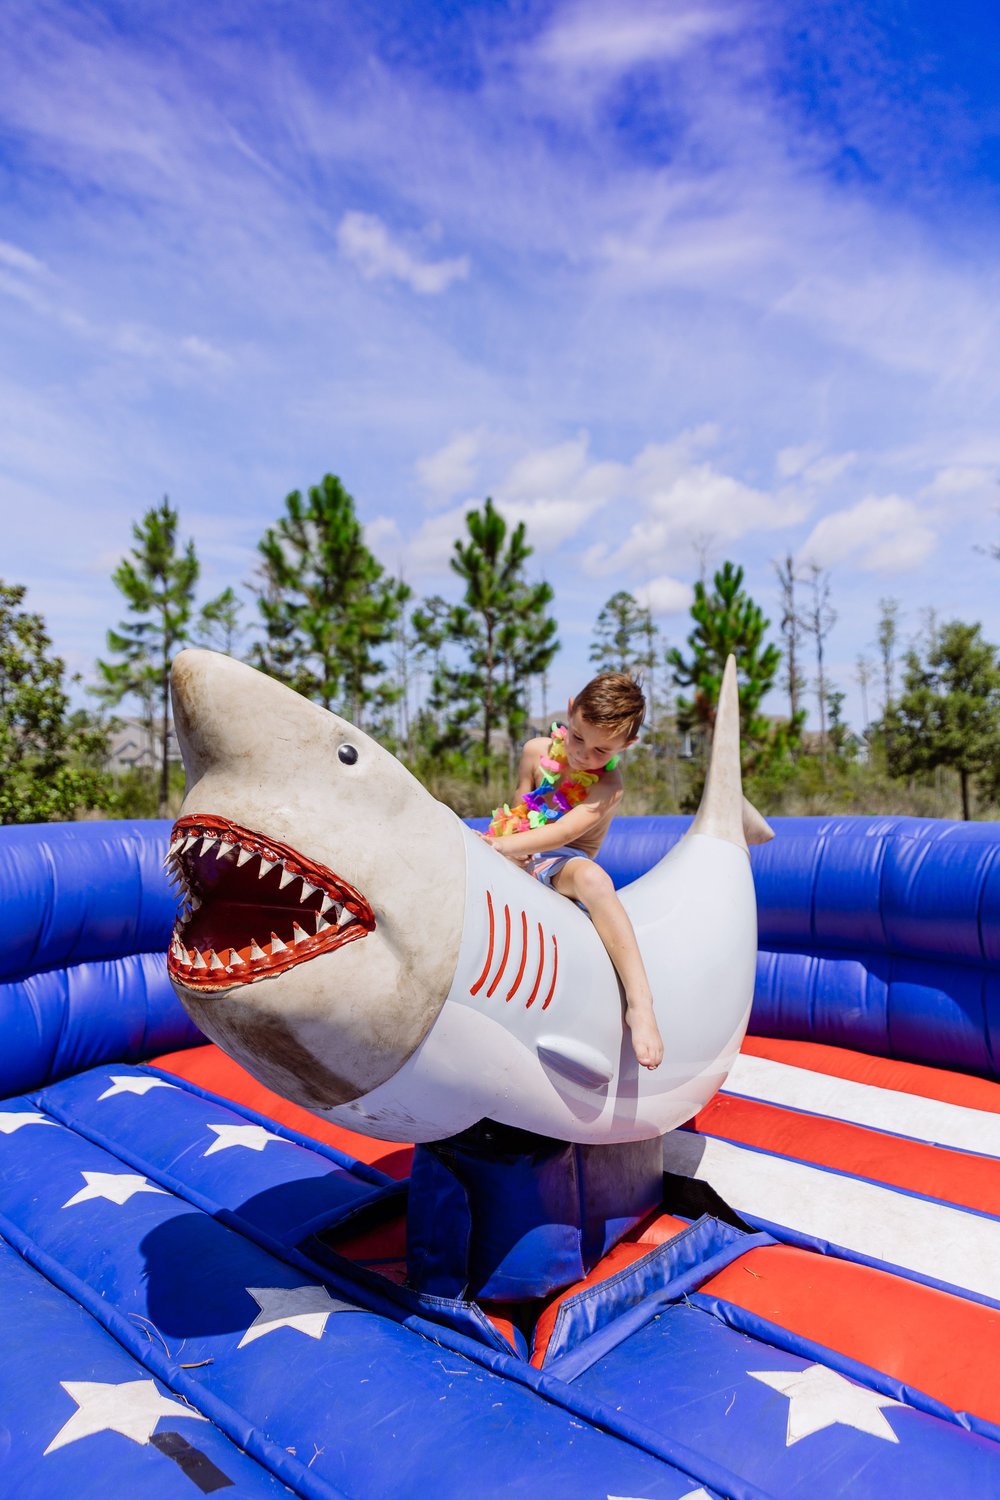 A mechanical shark was one of the many fun things available for those attending the back-to-school event at Shearwater living community on Aug. 21.